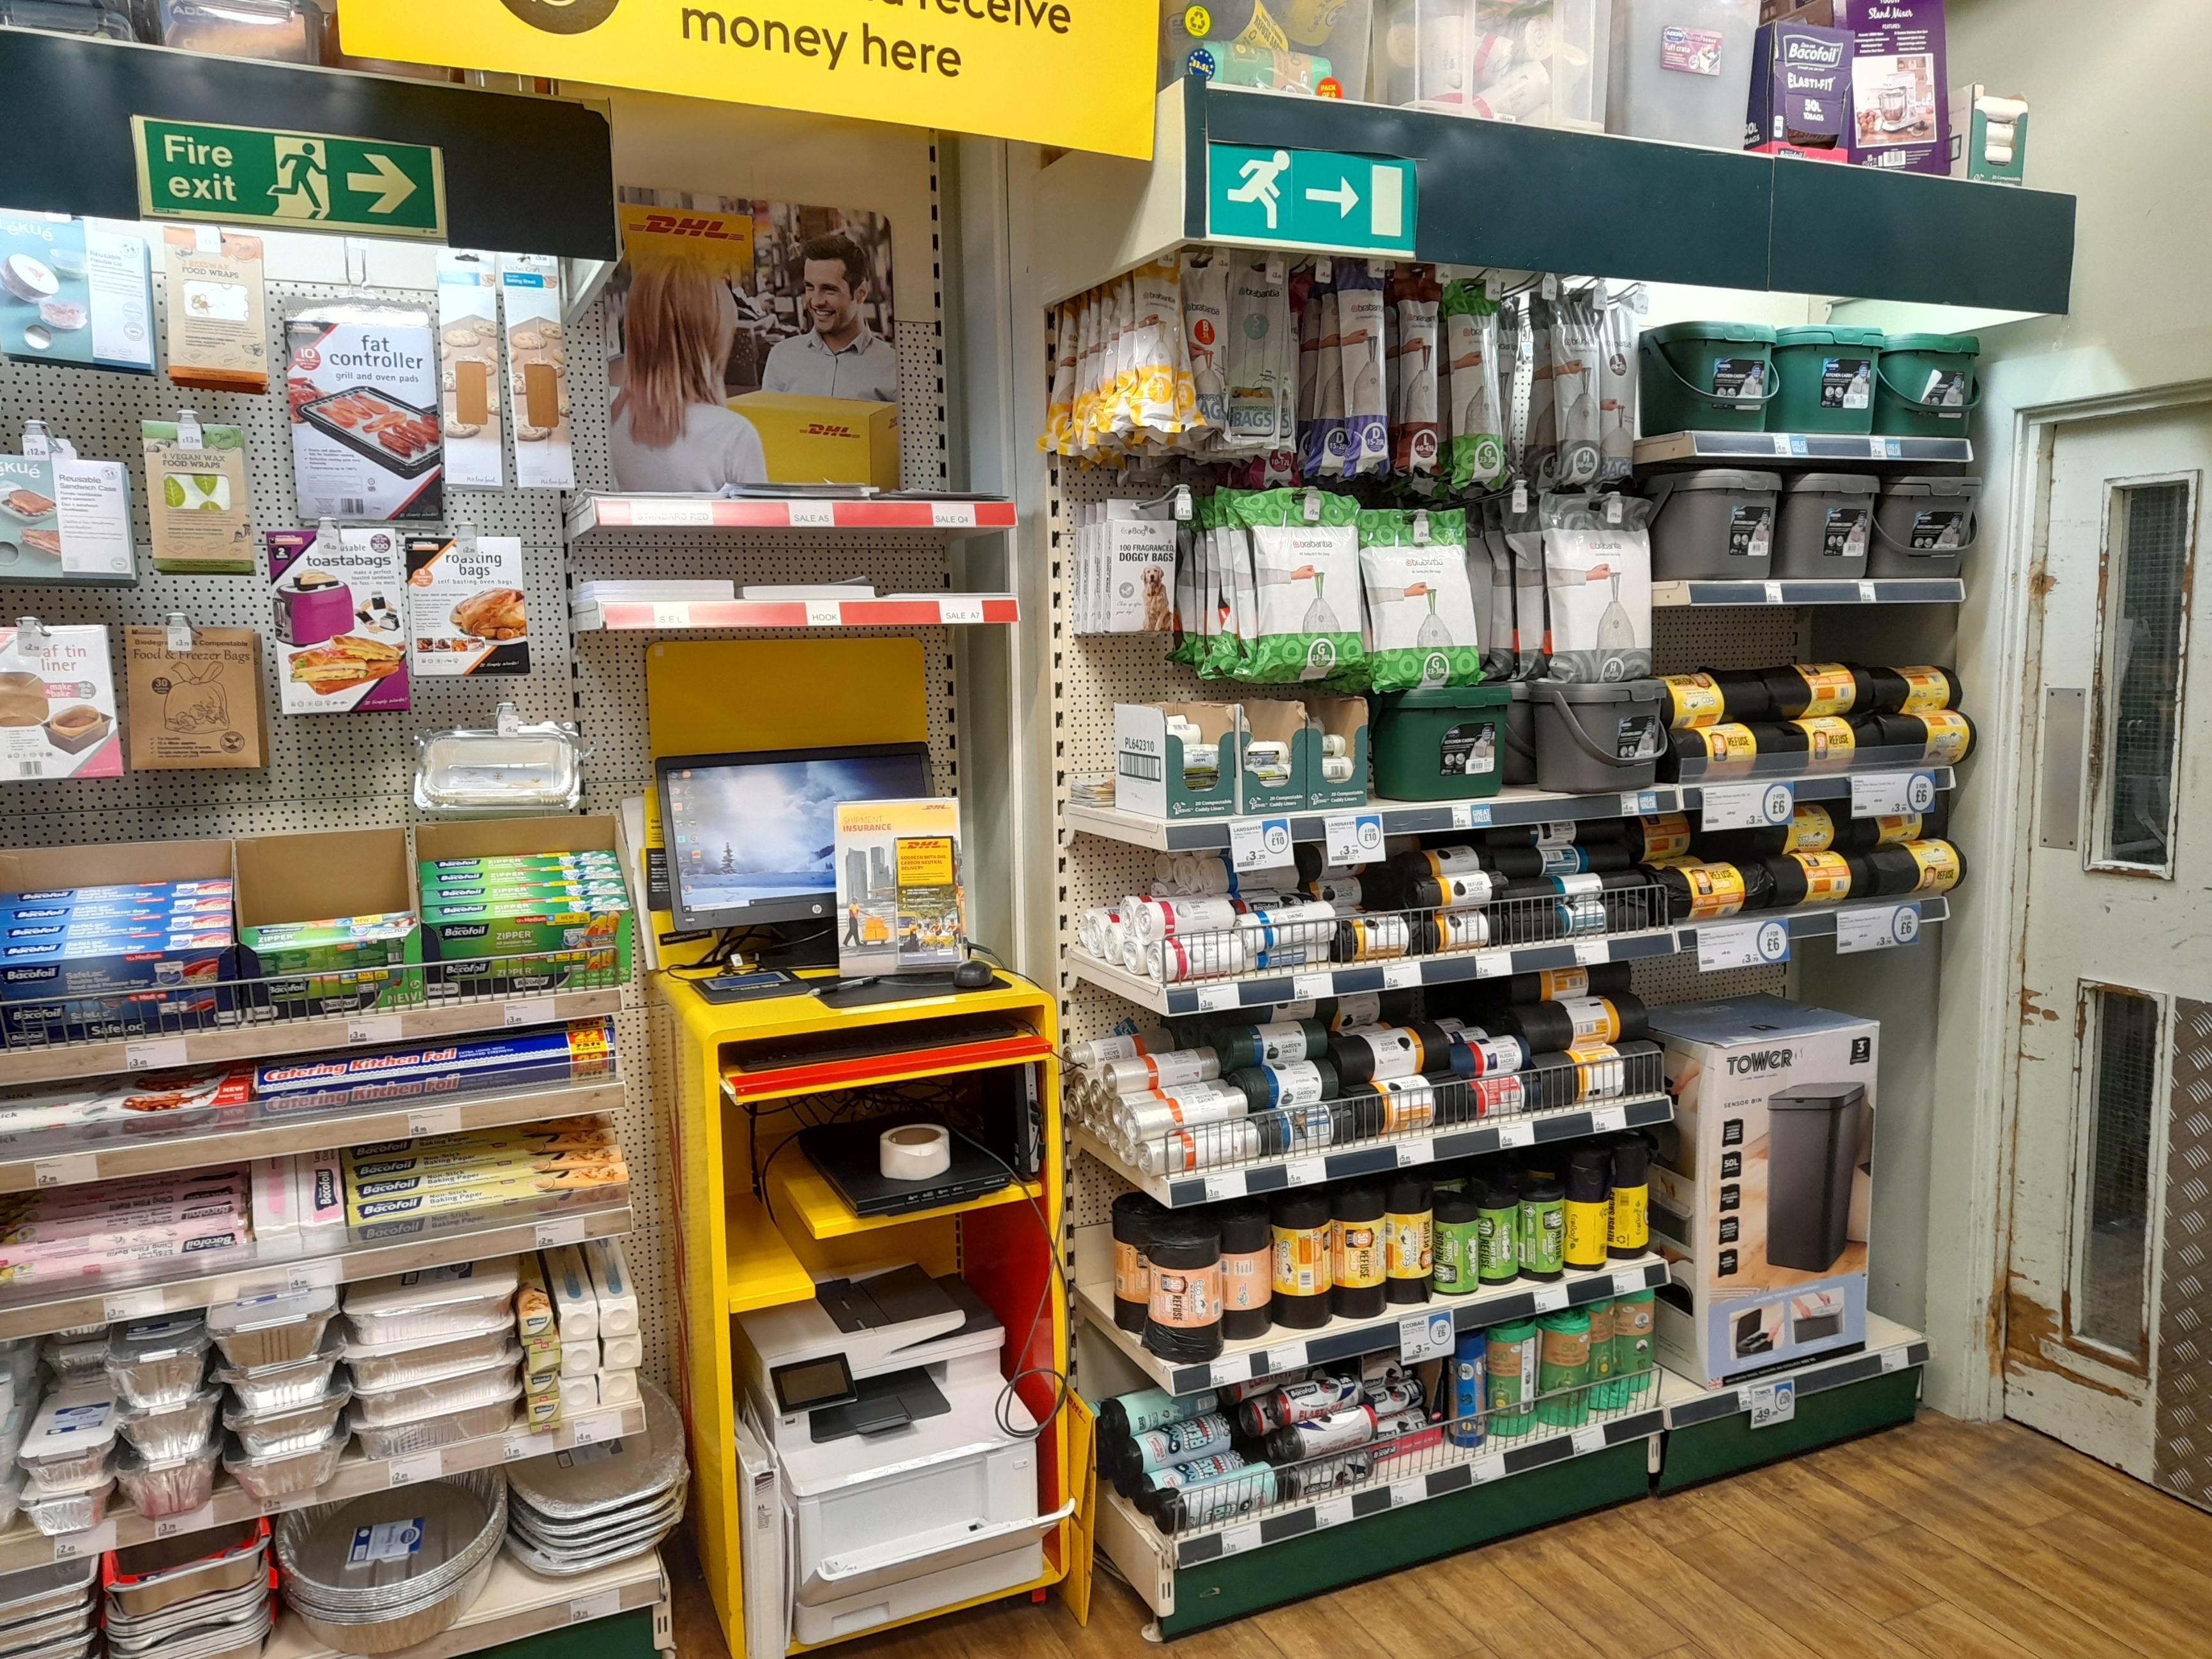 Images DHL Express Service Point (Robert Dyas Leamington Spa)